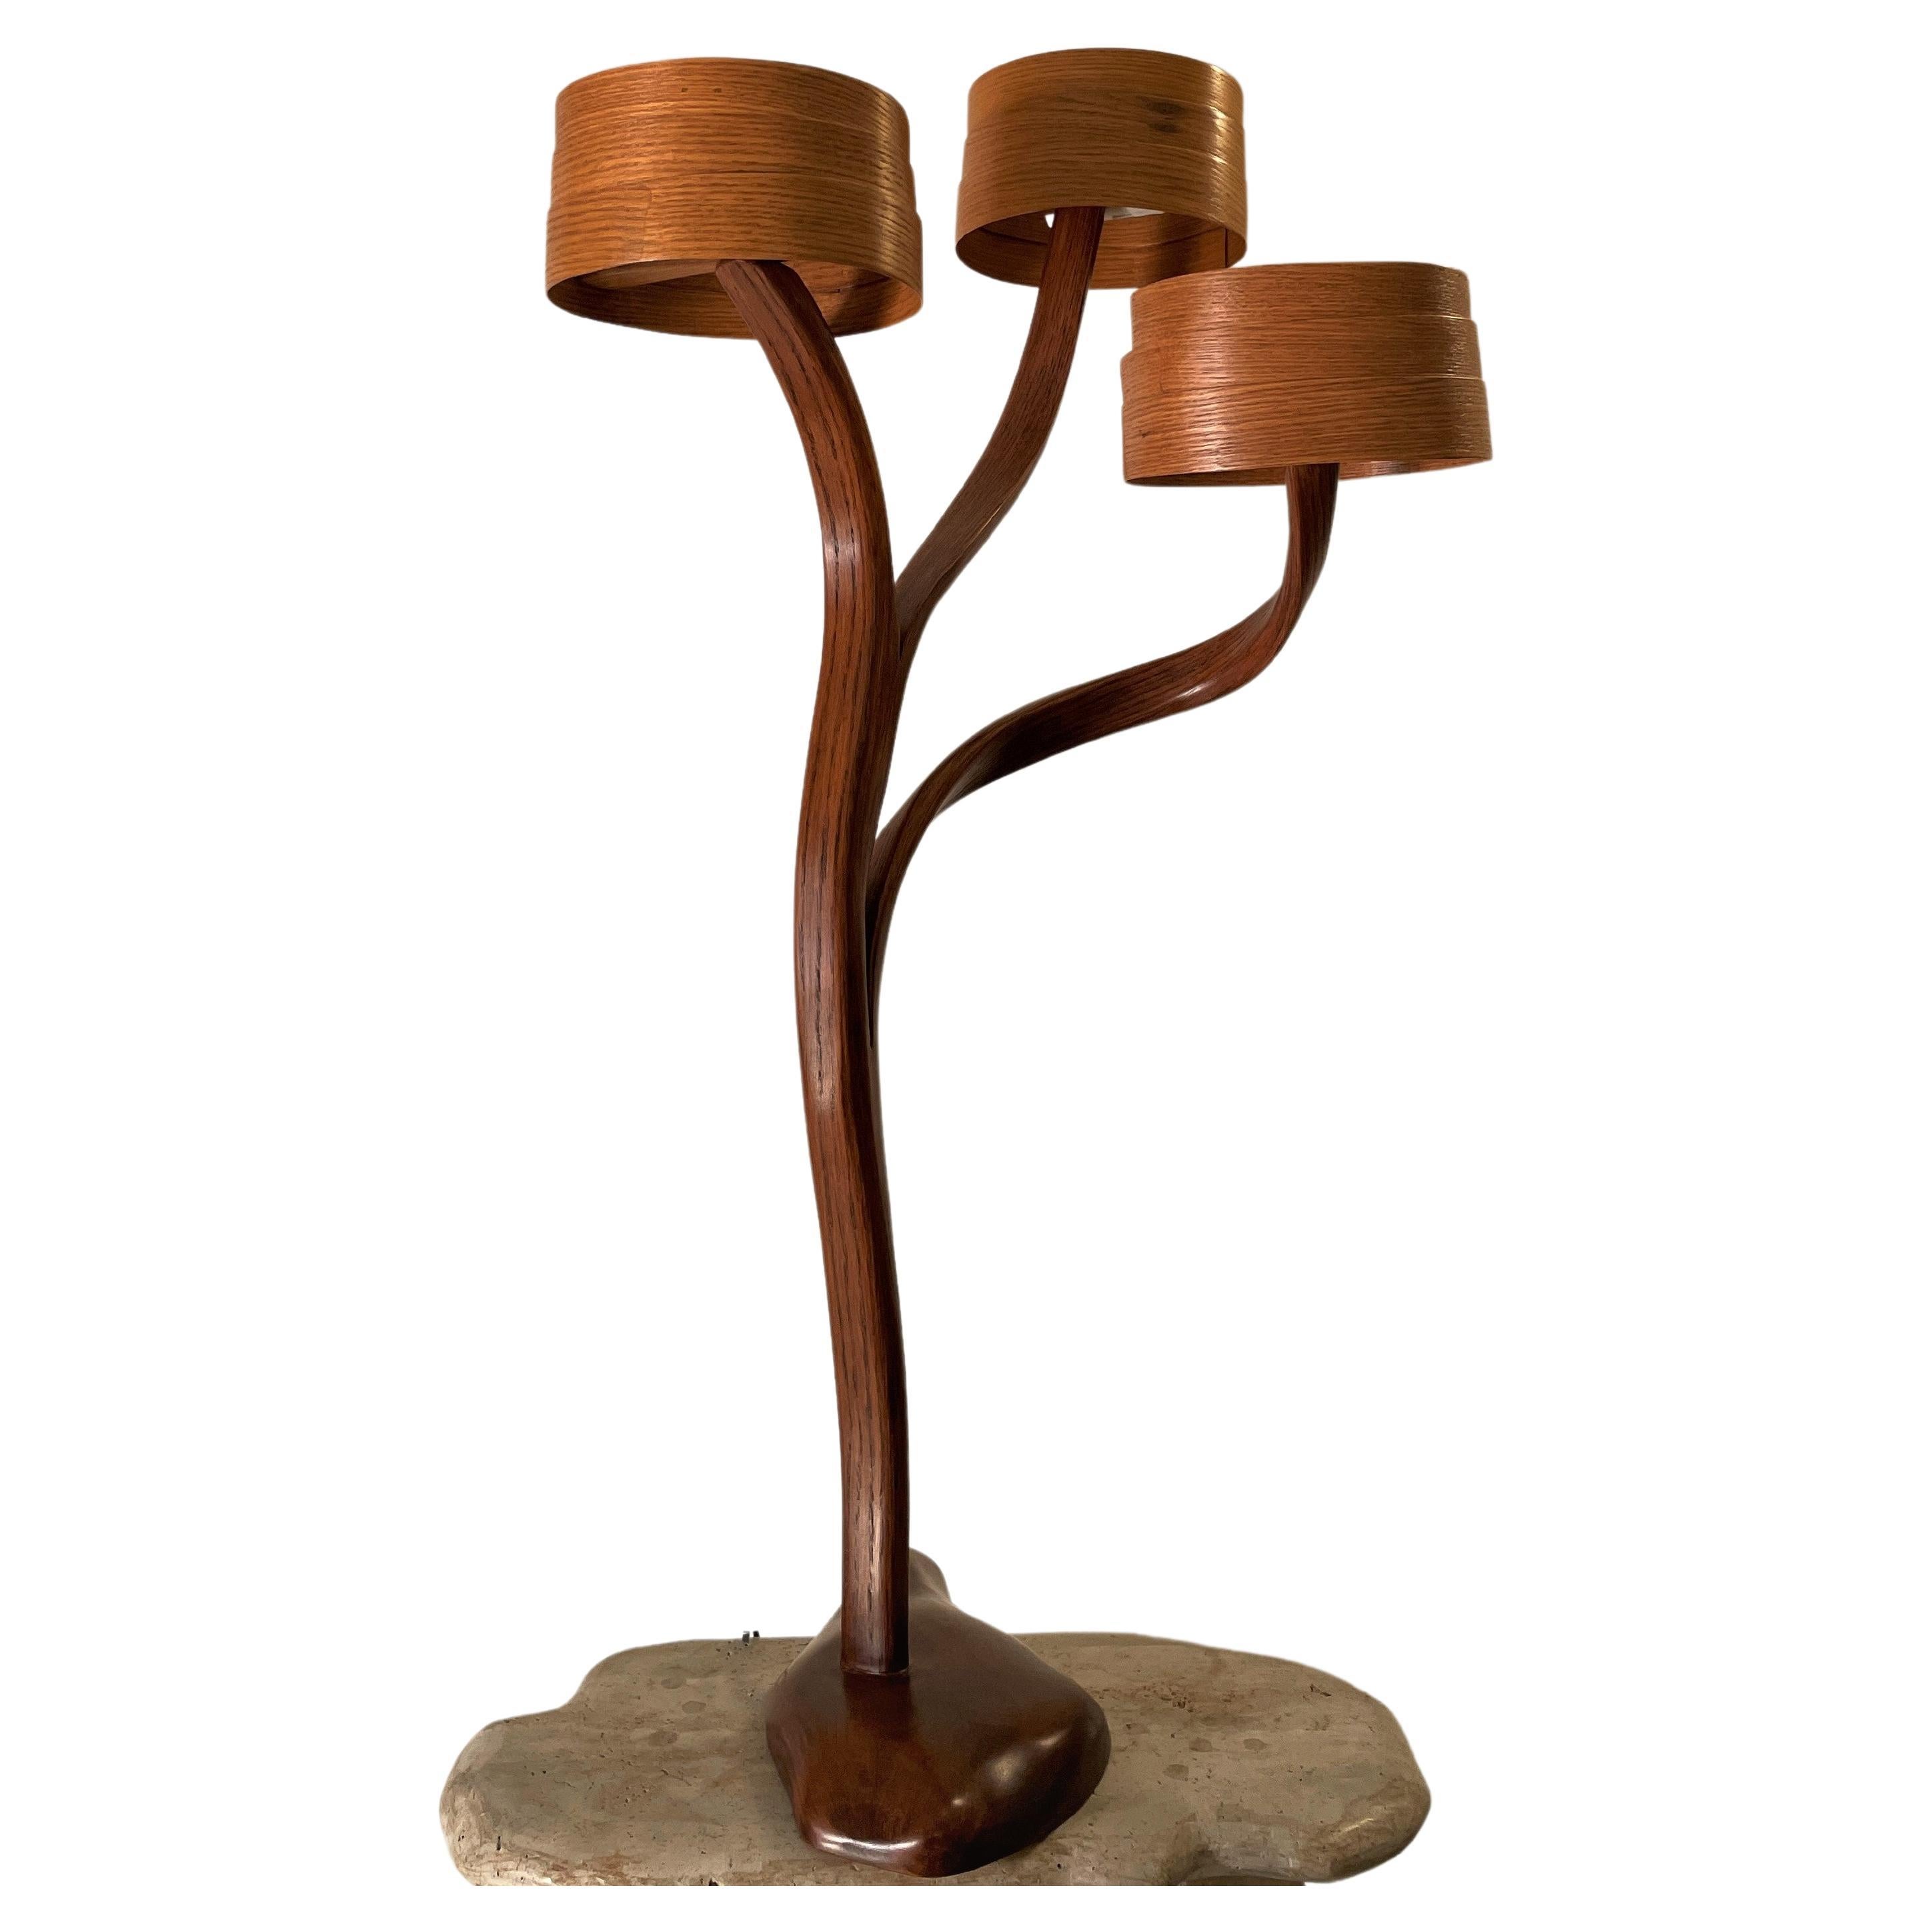 The table lamp has a free-form design; the wood bends and curves with beautiful flows to create the design. The handcrafted details on the piece such as the curves, varying thickness of the wood and twists give the piece its organic flows; the